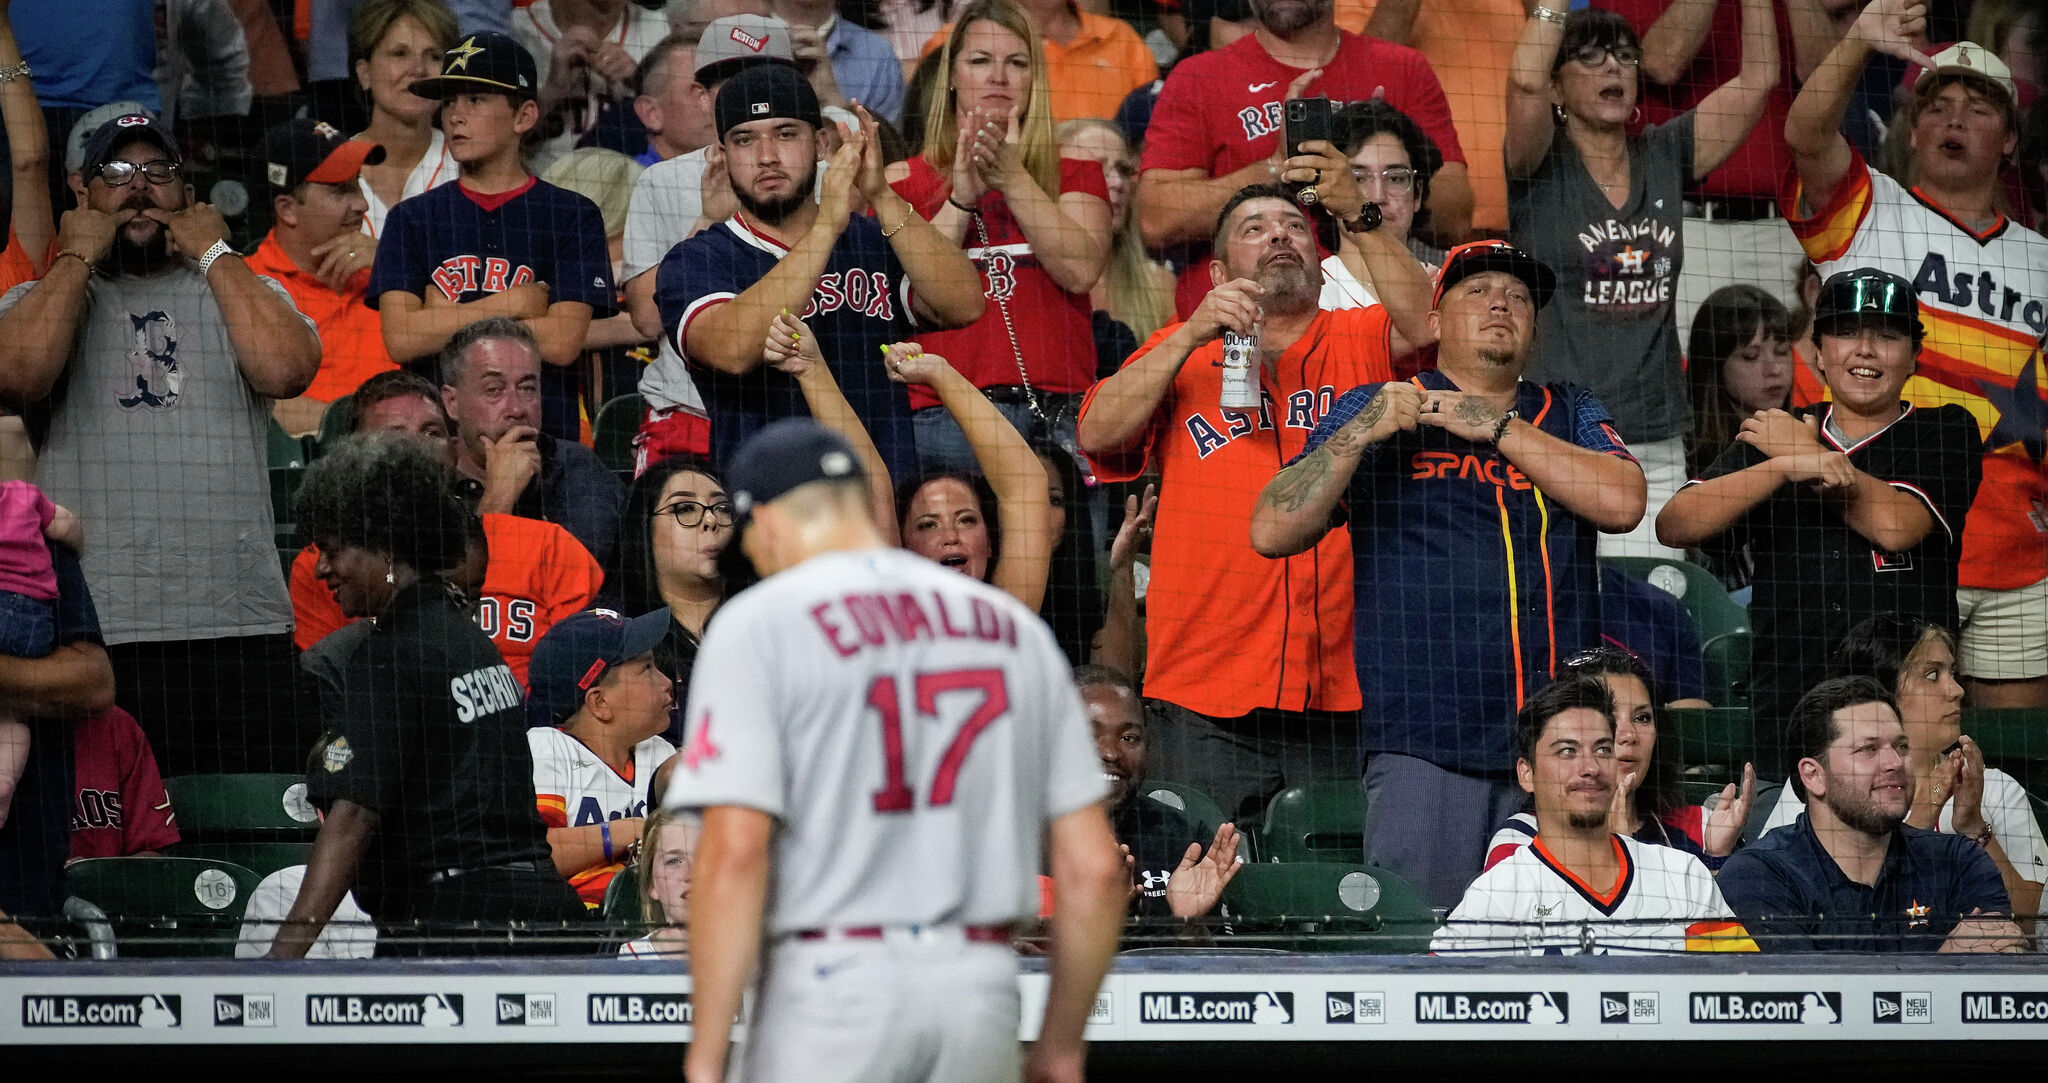 August 10, 2018: Members of the Astros Shooting Stars wave to the